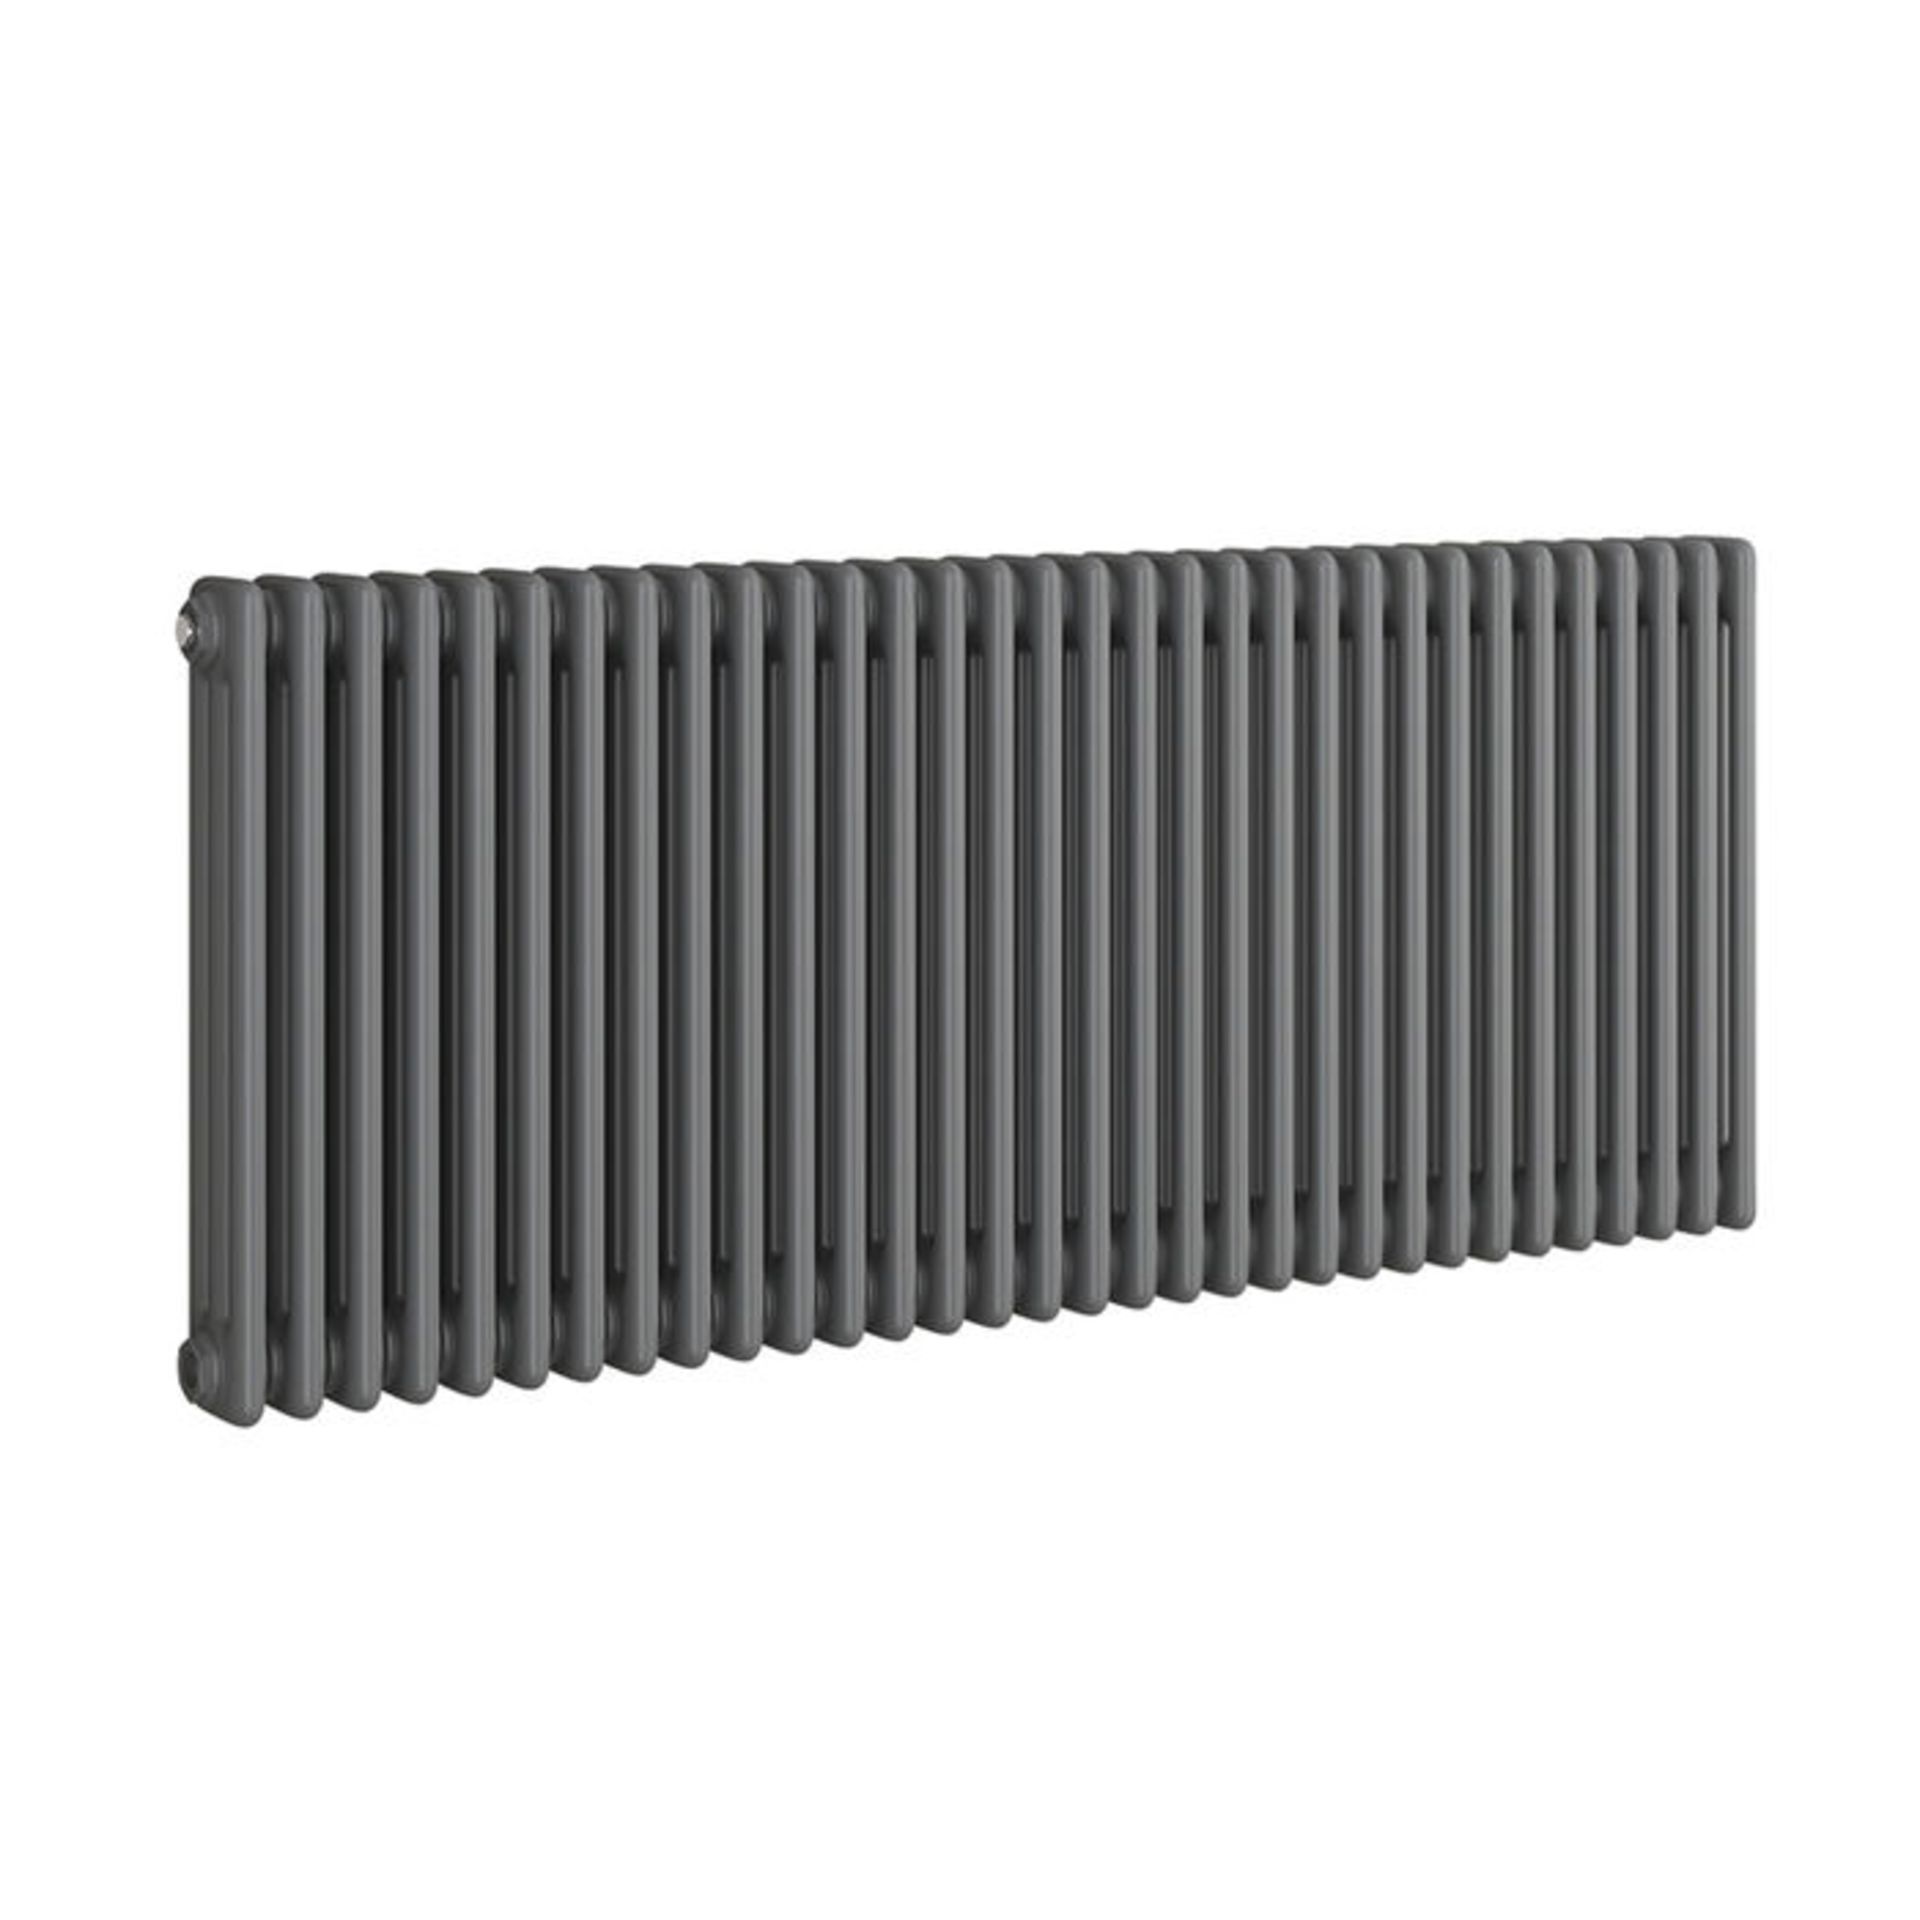 NEW & BOXED 600x1188mm Anthracite Double Panel Horizontal Colosseum Traditional Radiator. RCA5... - Image 3 of 3